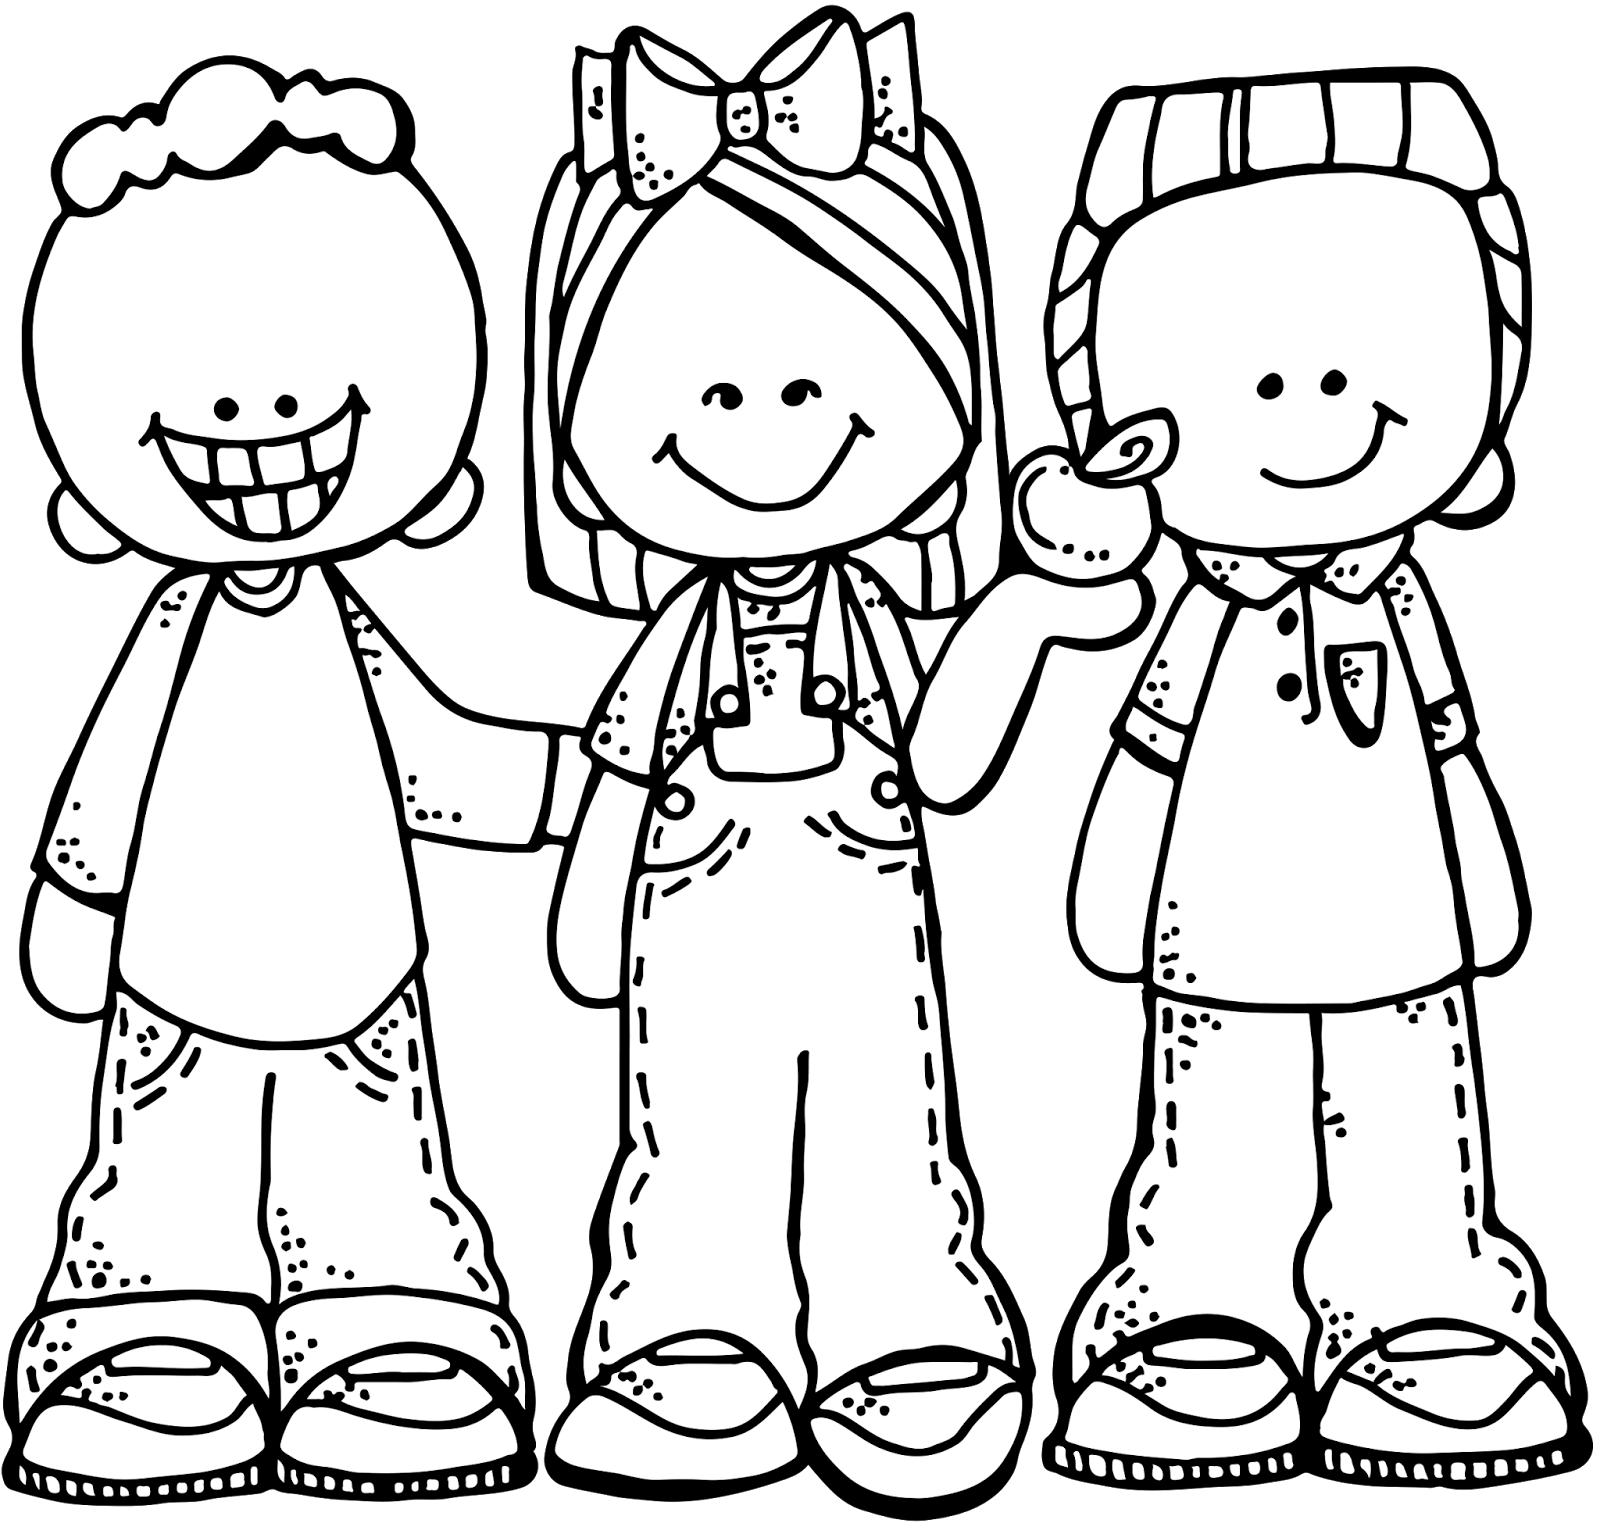 kindness clipart black and white